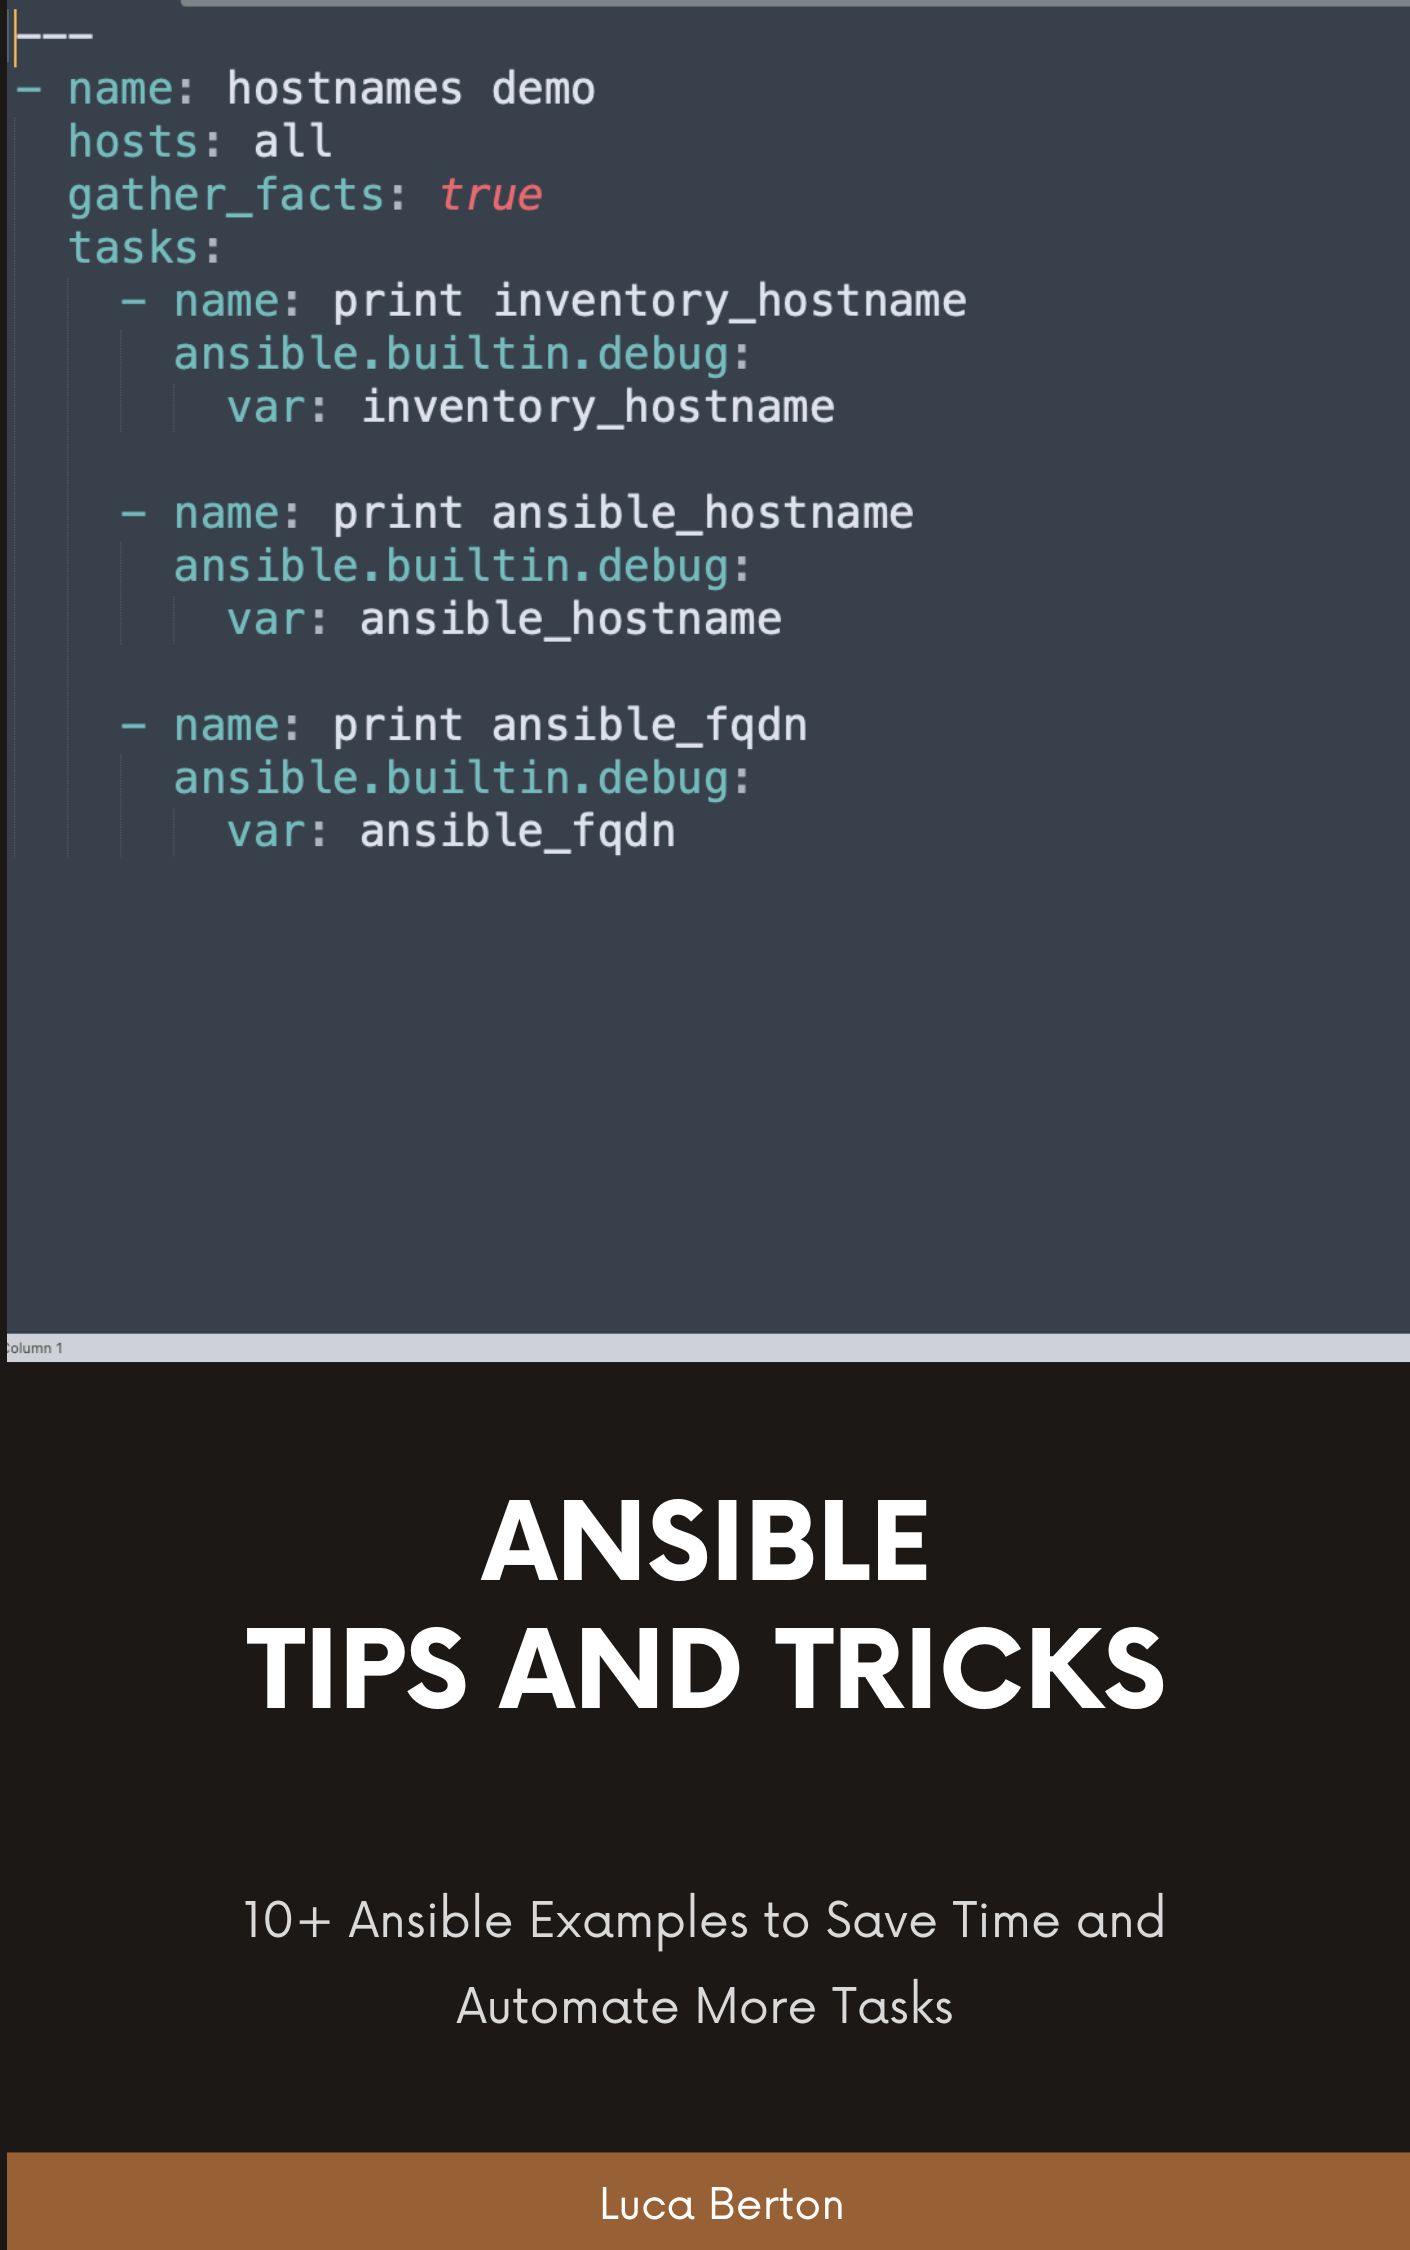 Ansible Tips and Tricks: 10+ Ansible Examples to Save Time and Automate More Tasks